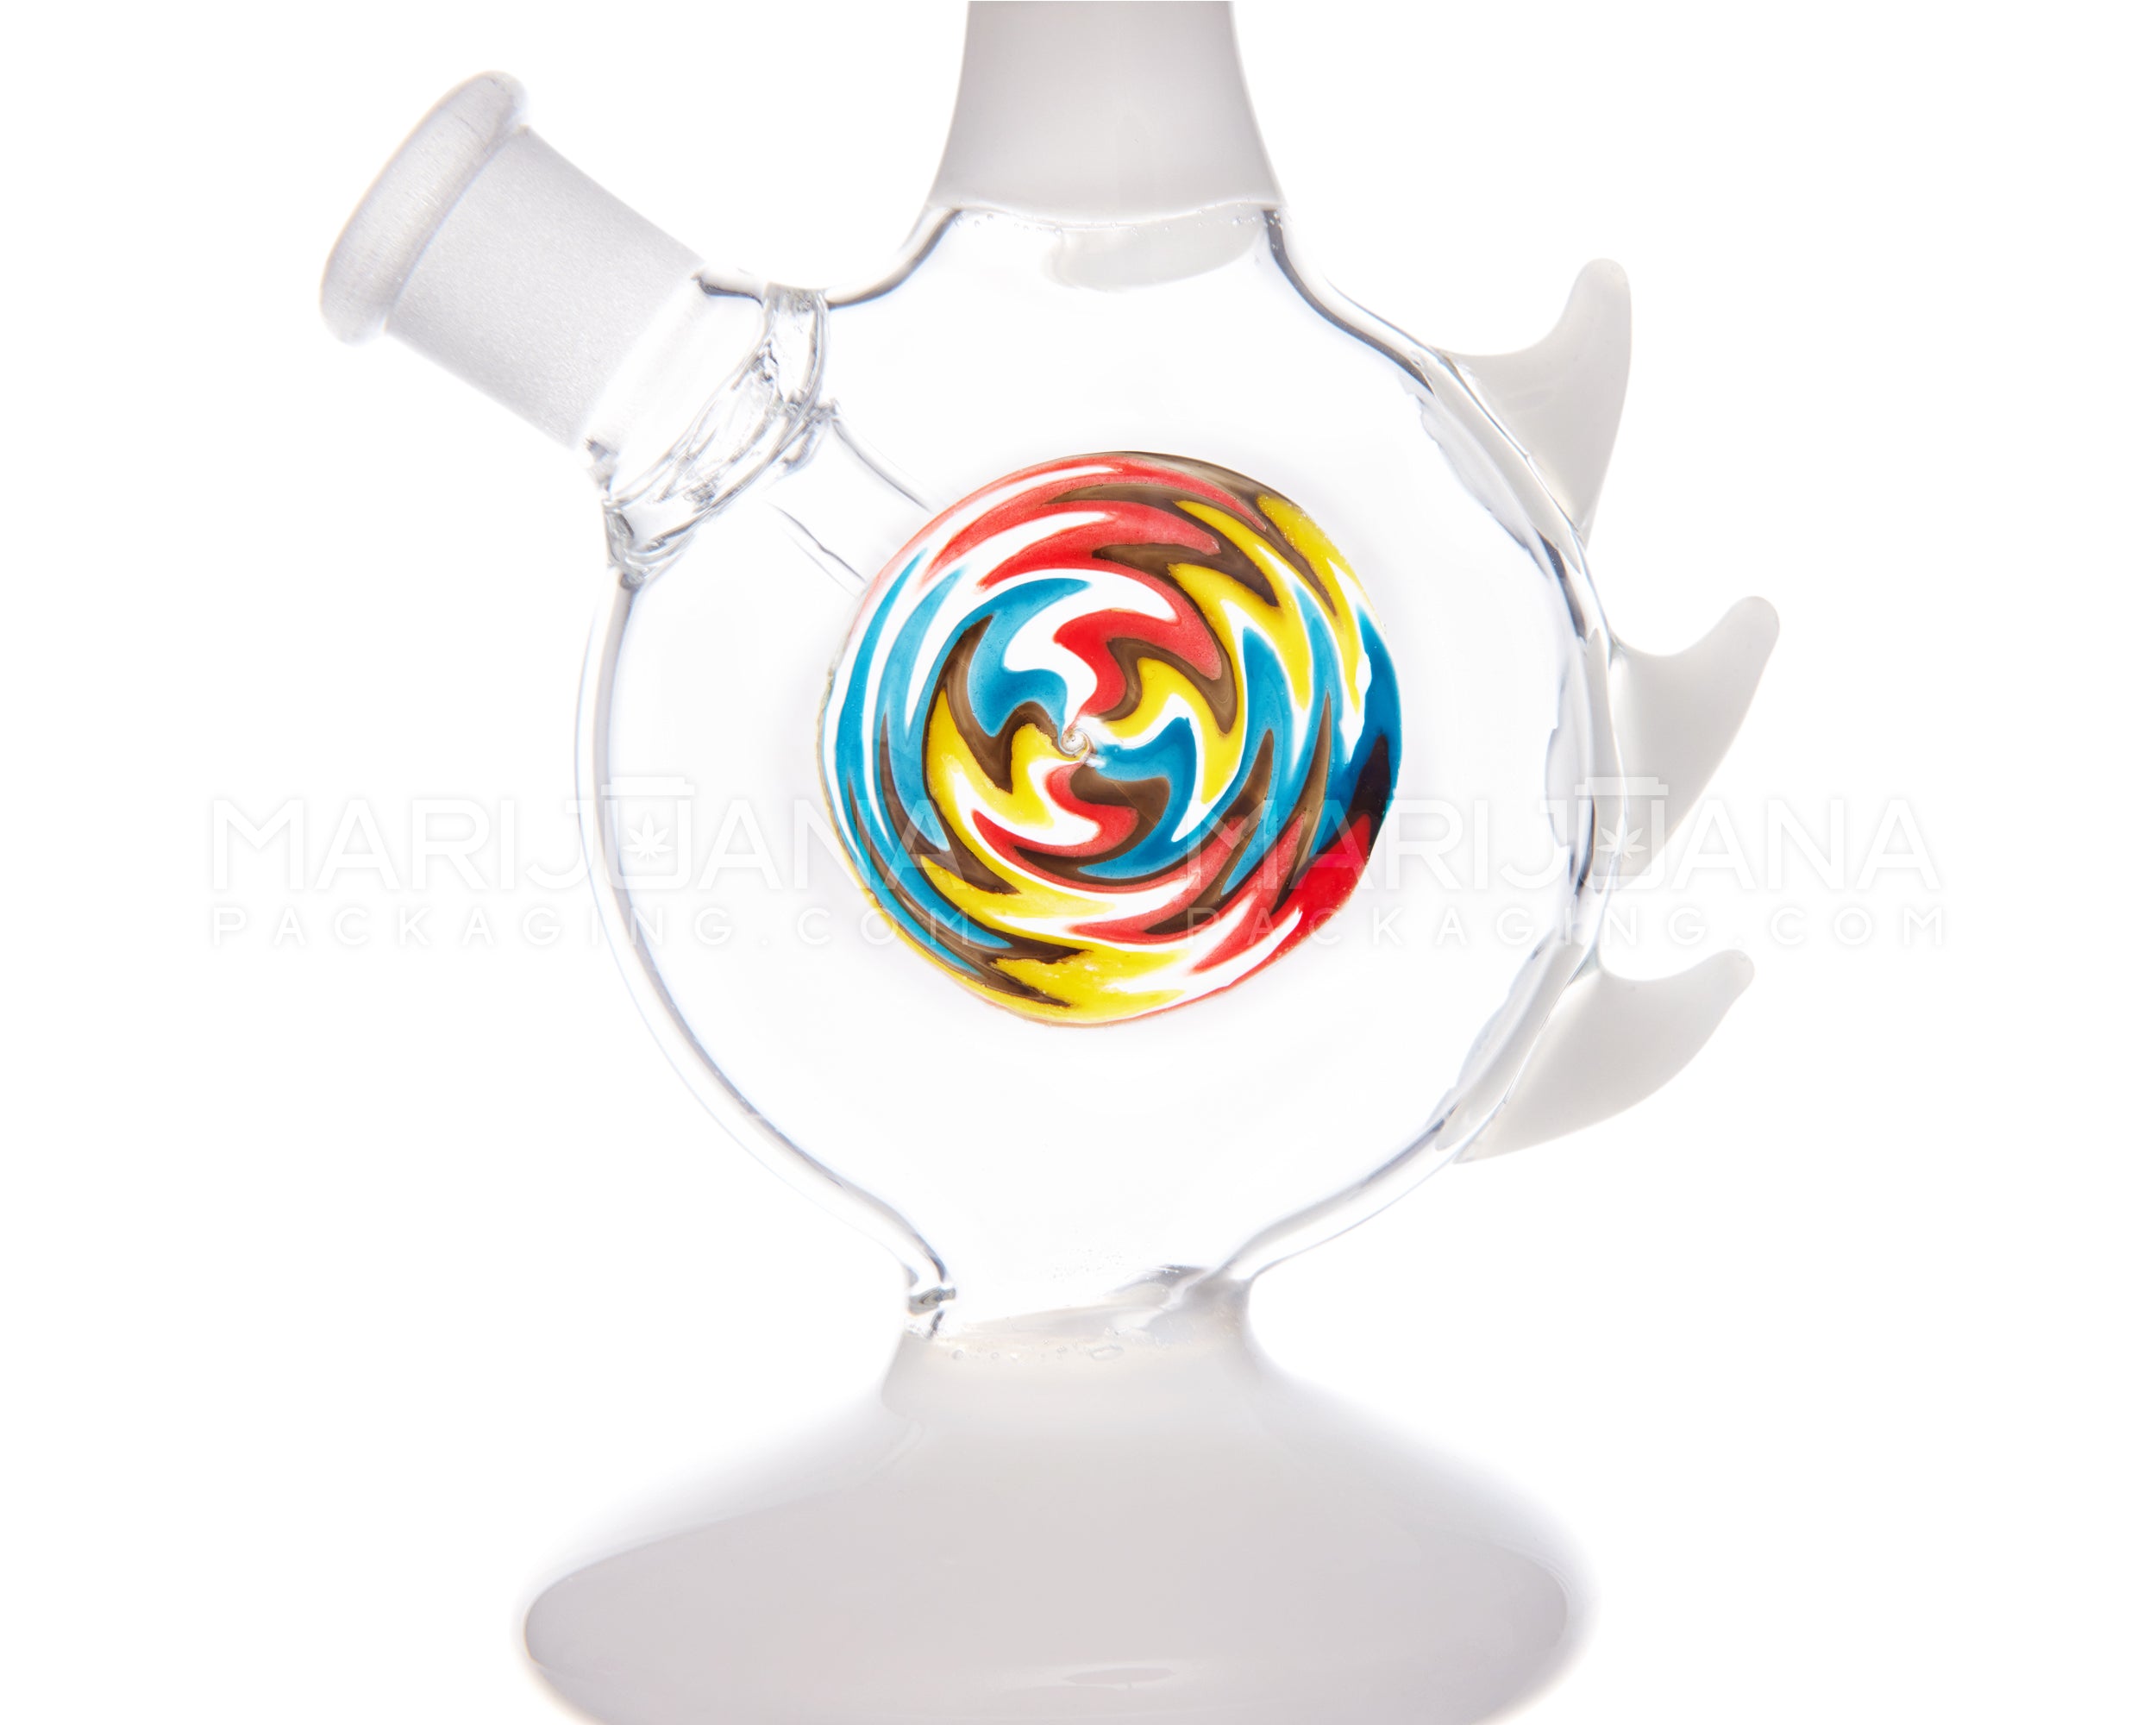 Straight Neck Wig Wag Circular Flask Glass Water Pipe w/ Triple Spikes | 8in Tall - 14mm Bowl - White - 3